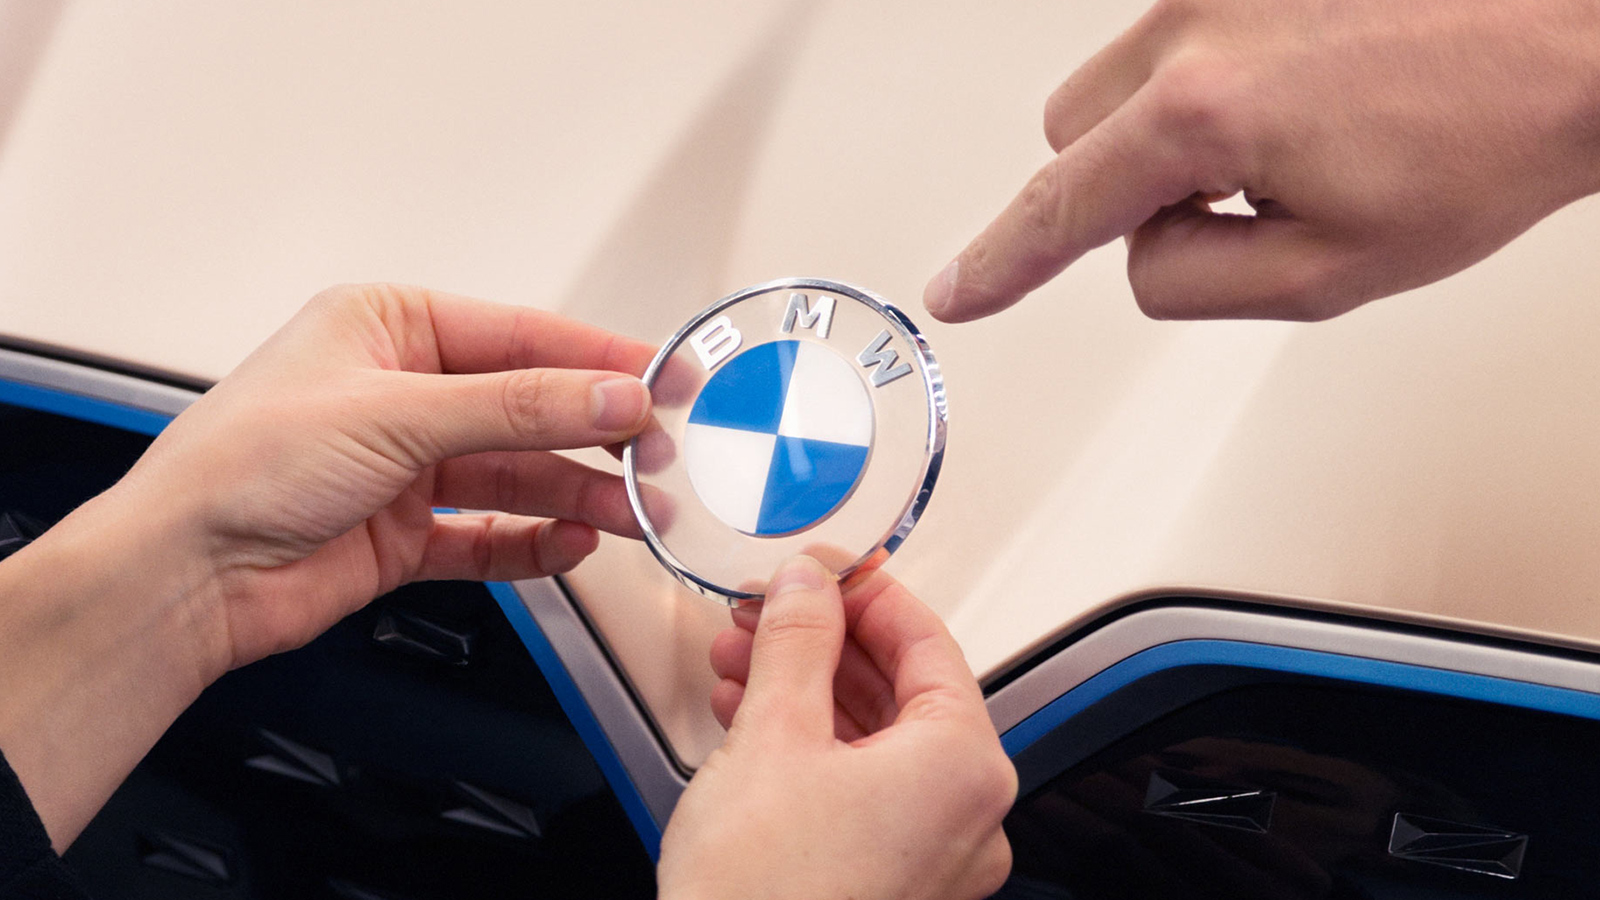 BMW unveils new logo to 'express openness and transparency' of brand